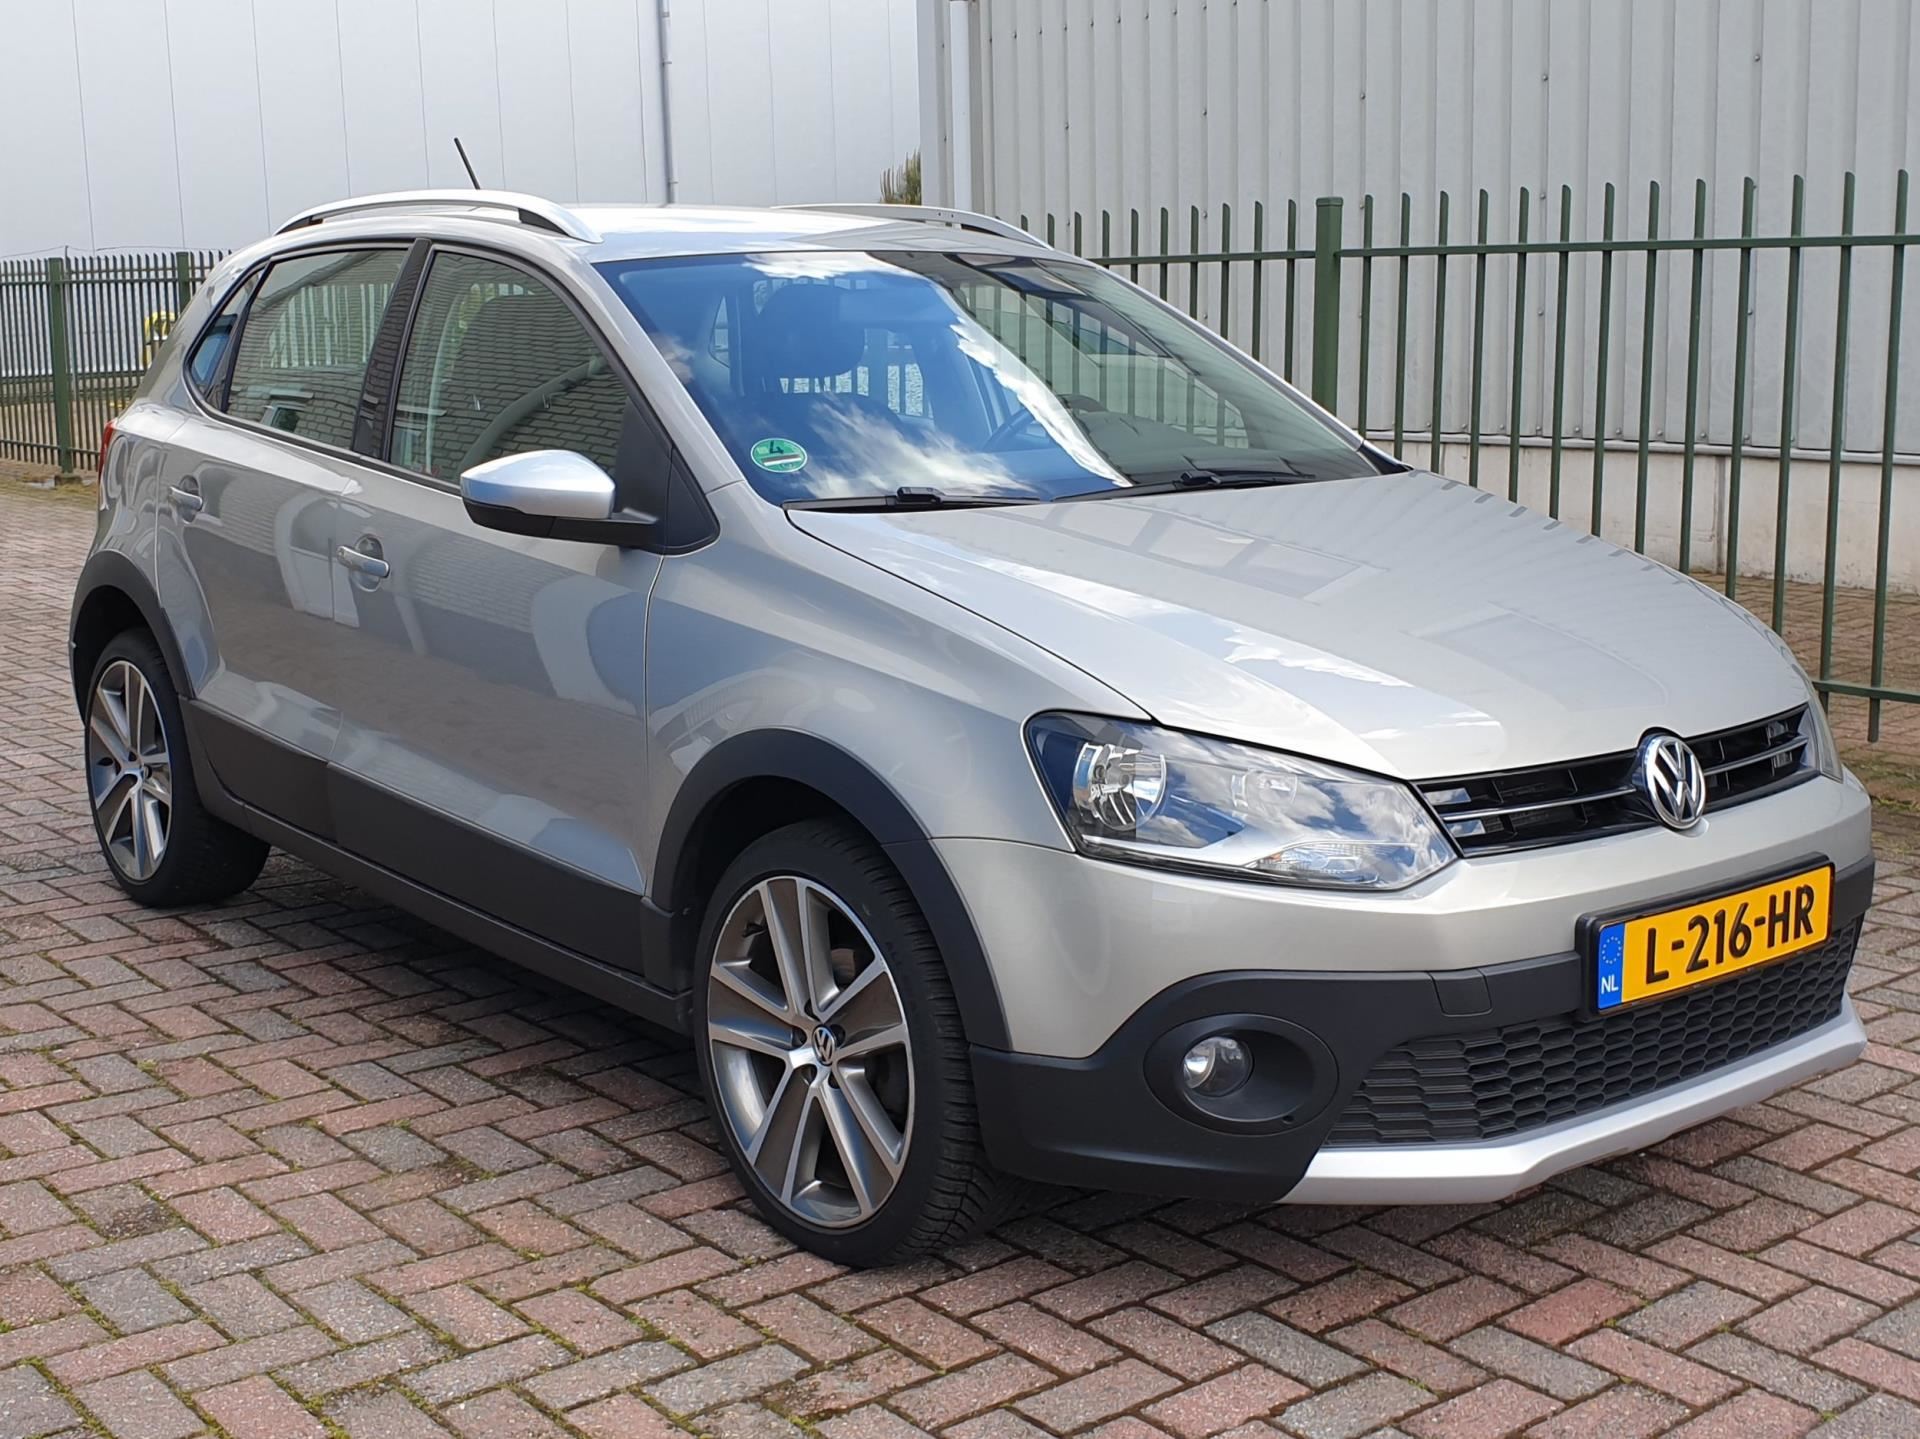 Afkorting Oefening Charmant Volkswagen POLO - CROSS 1.2 16V AUTOMAAT AIRCO- CRUISE- PDC- 90PK - 2013 -  Benzine - www.verstegen-autos.nl